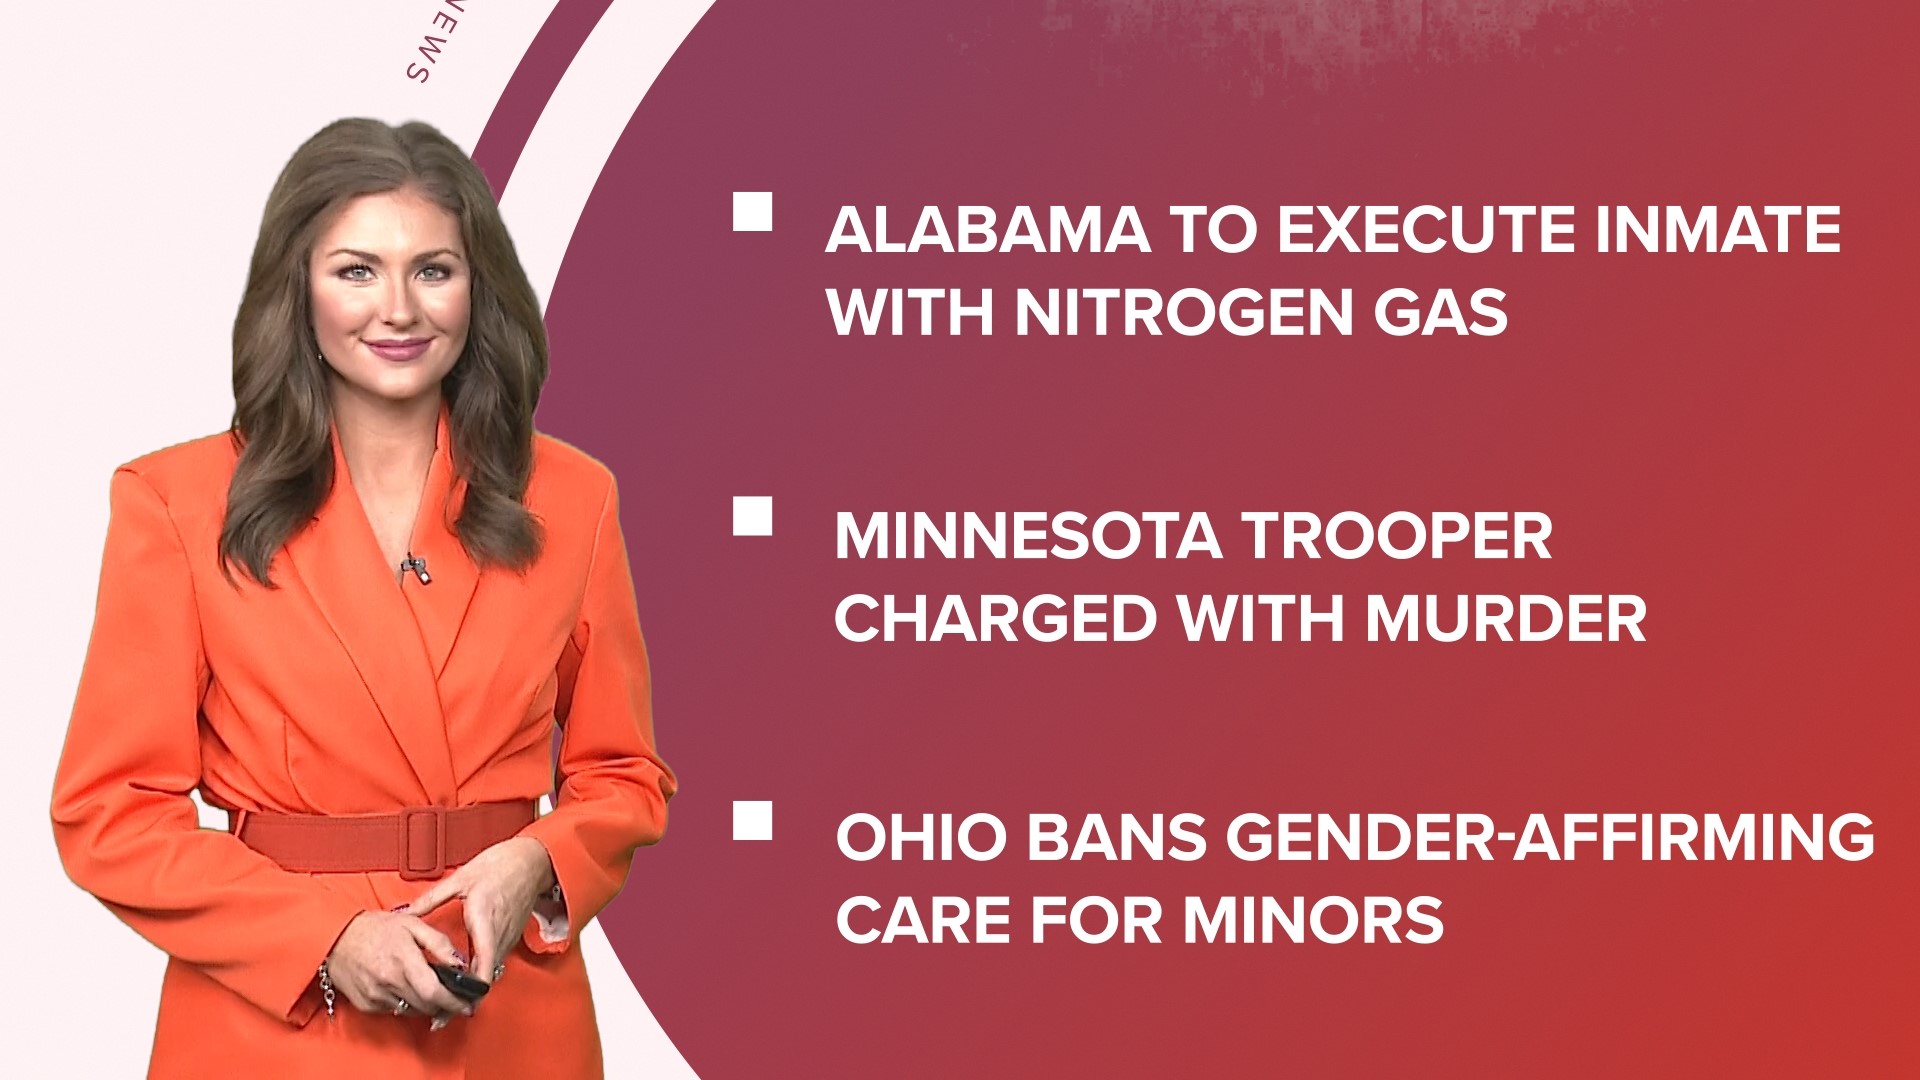 A look at what is happening in the news from Alabama to execute an inmate with nitrogen gas for the first time to Ohio banning gender-affirming care for minors.